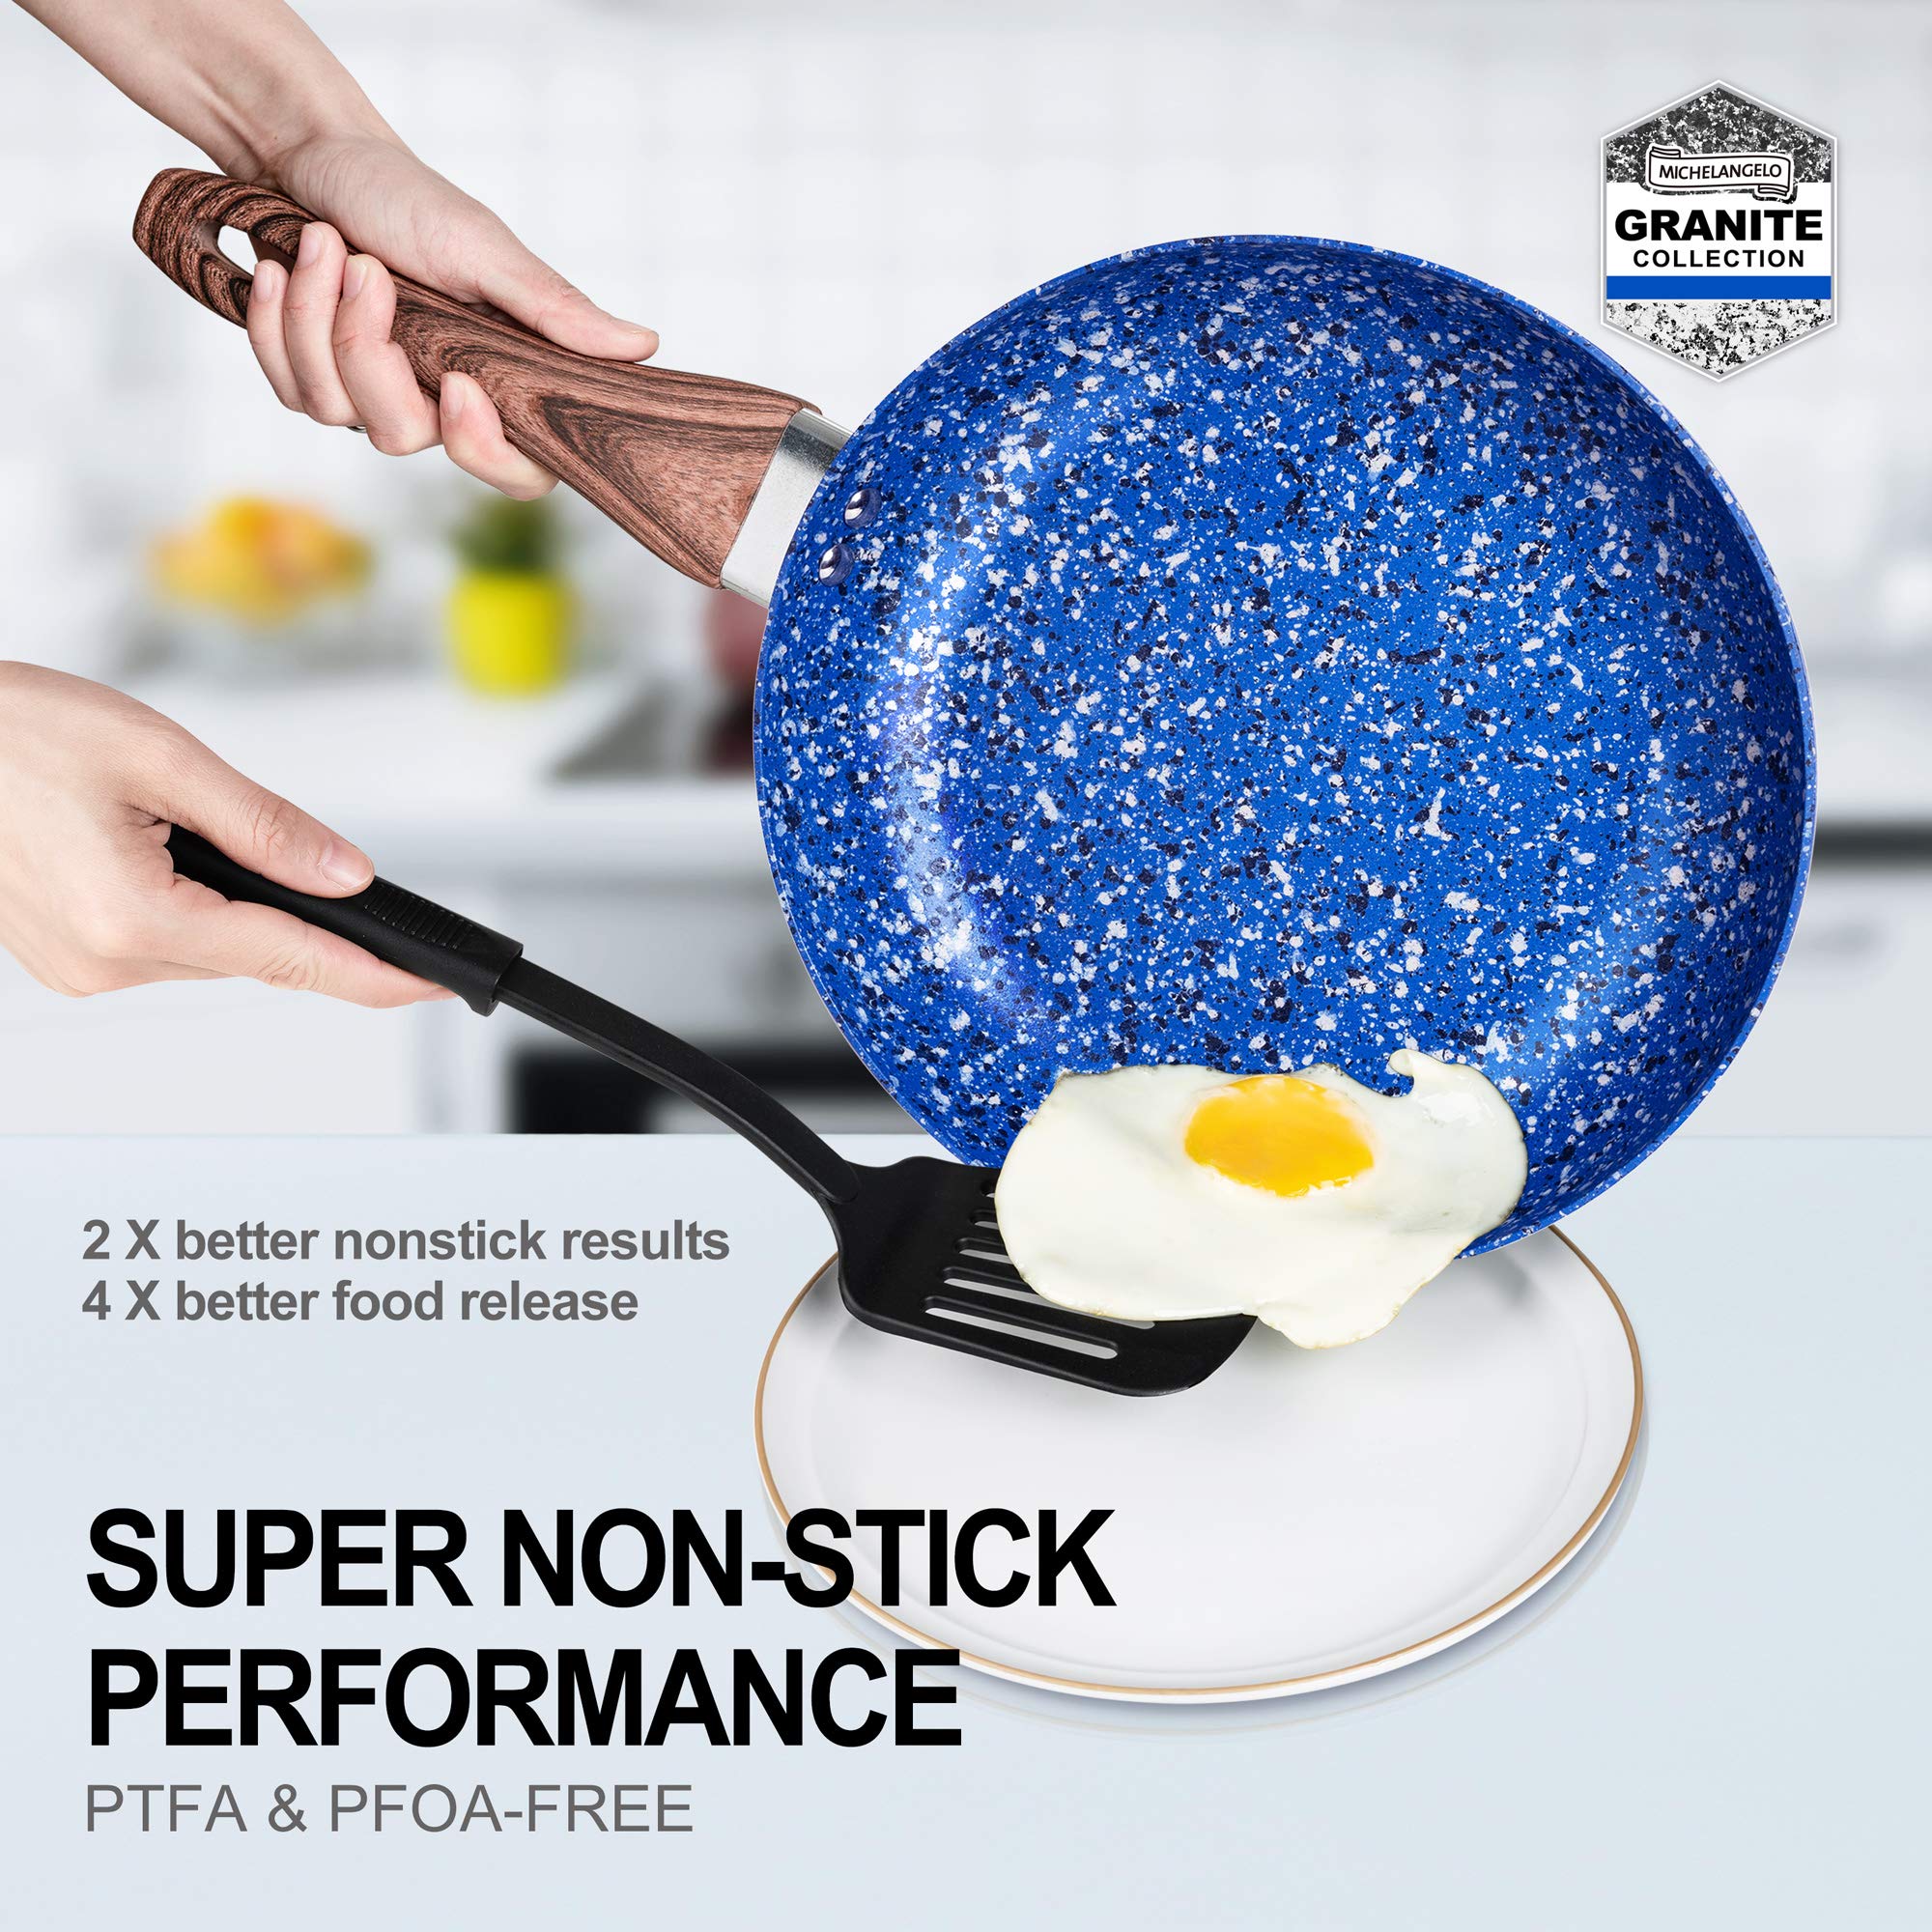 Michelangelo Nonstick 12 Inch Granite Frying Pan with Lid, Ceramic Coating, Induction Ready